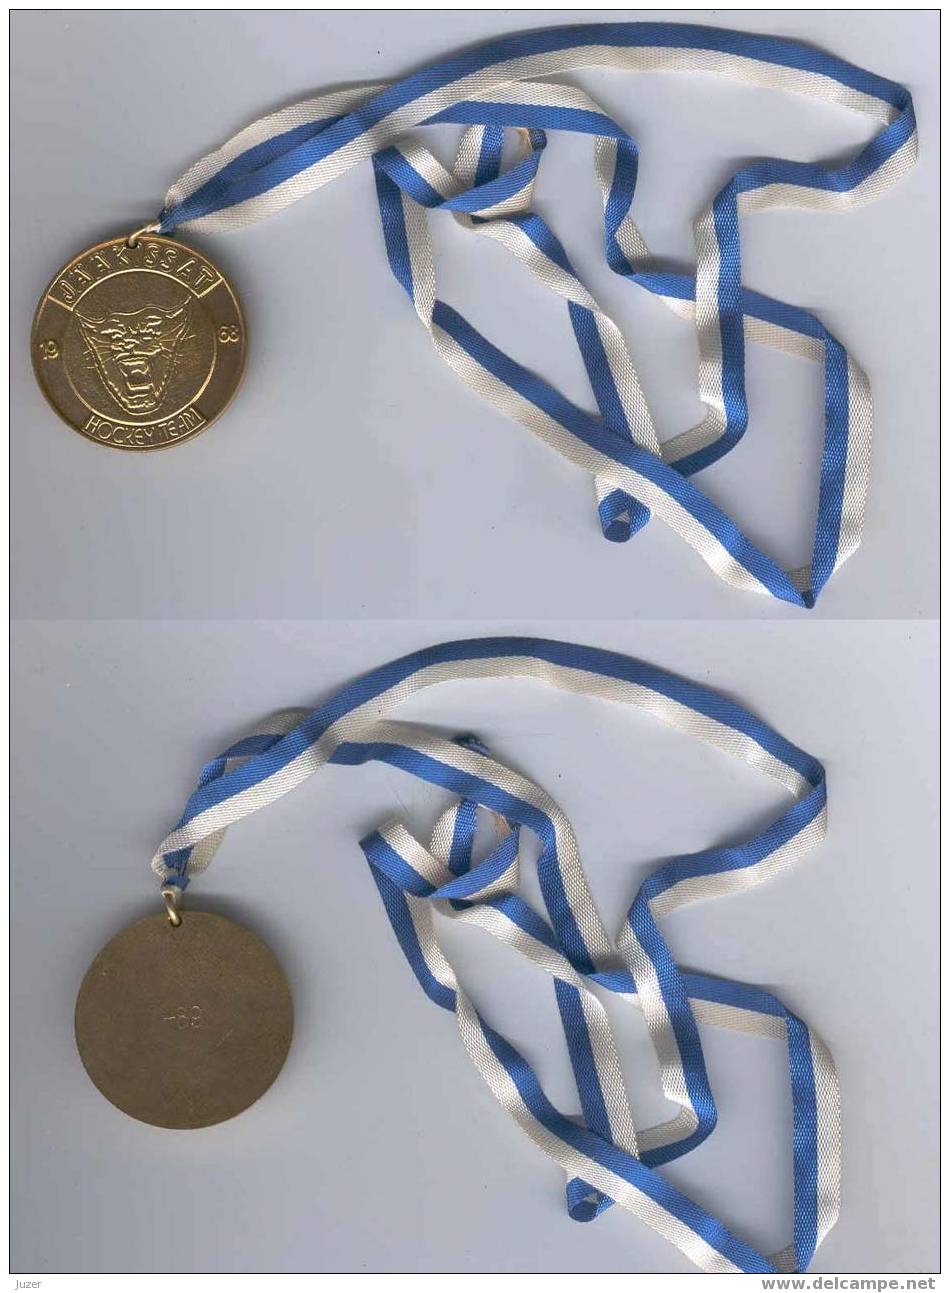 Finland: ICE CATS Hockey Team Medal (1989) - Habillement, Souvenirs & Autres